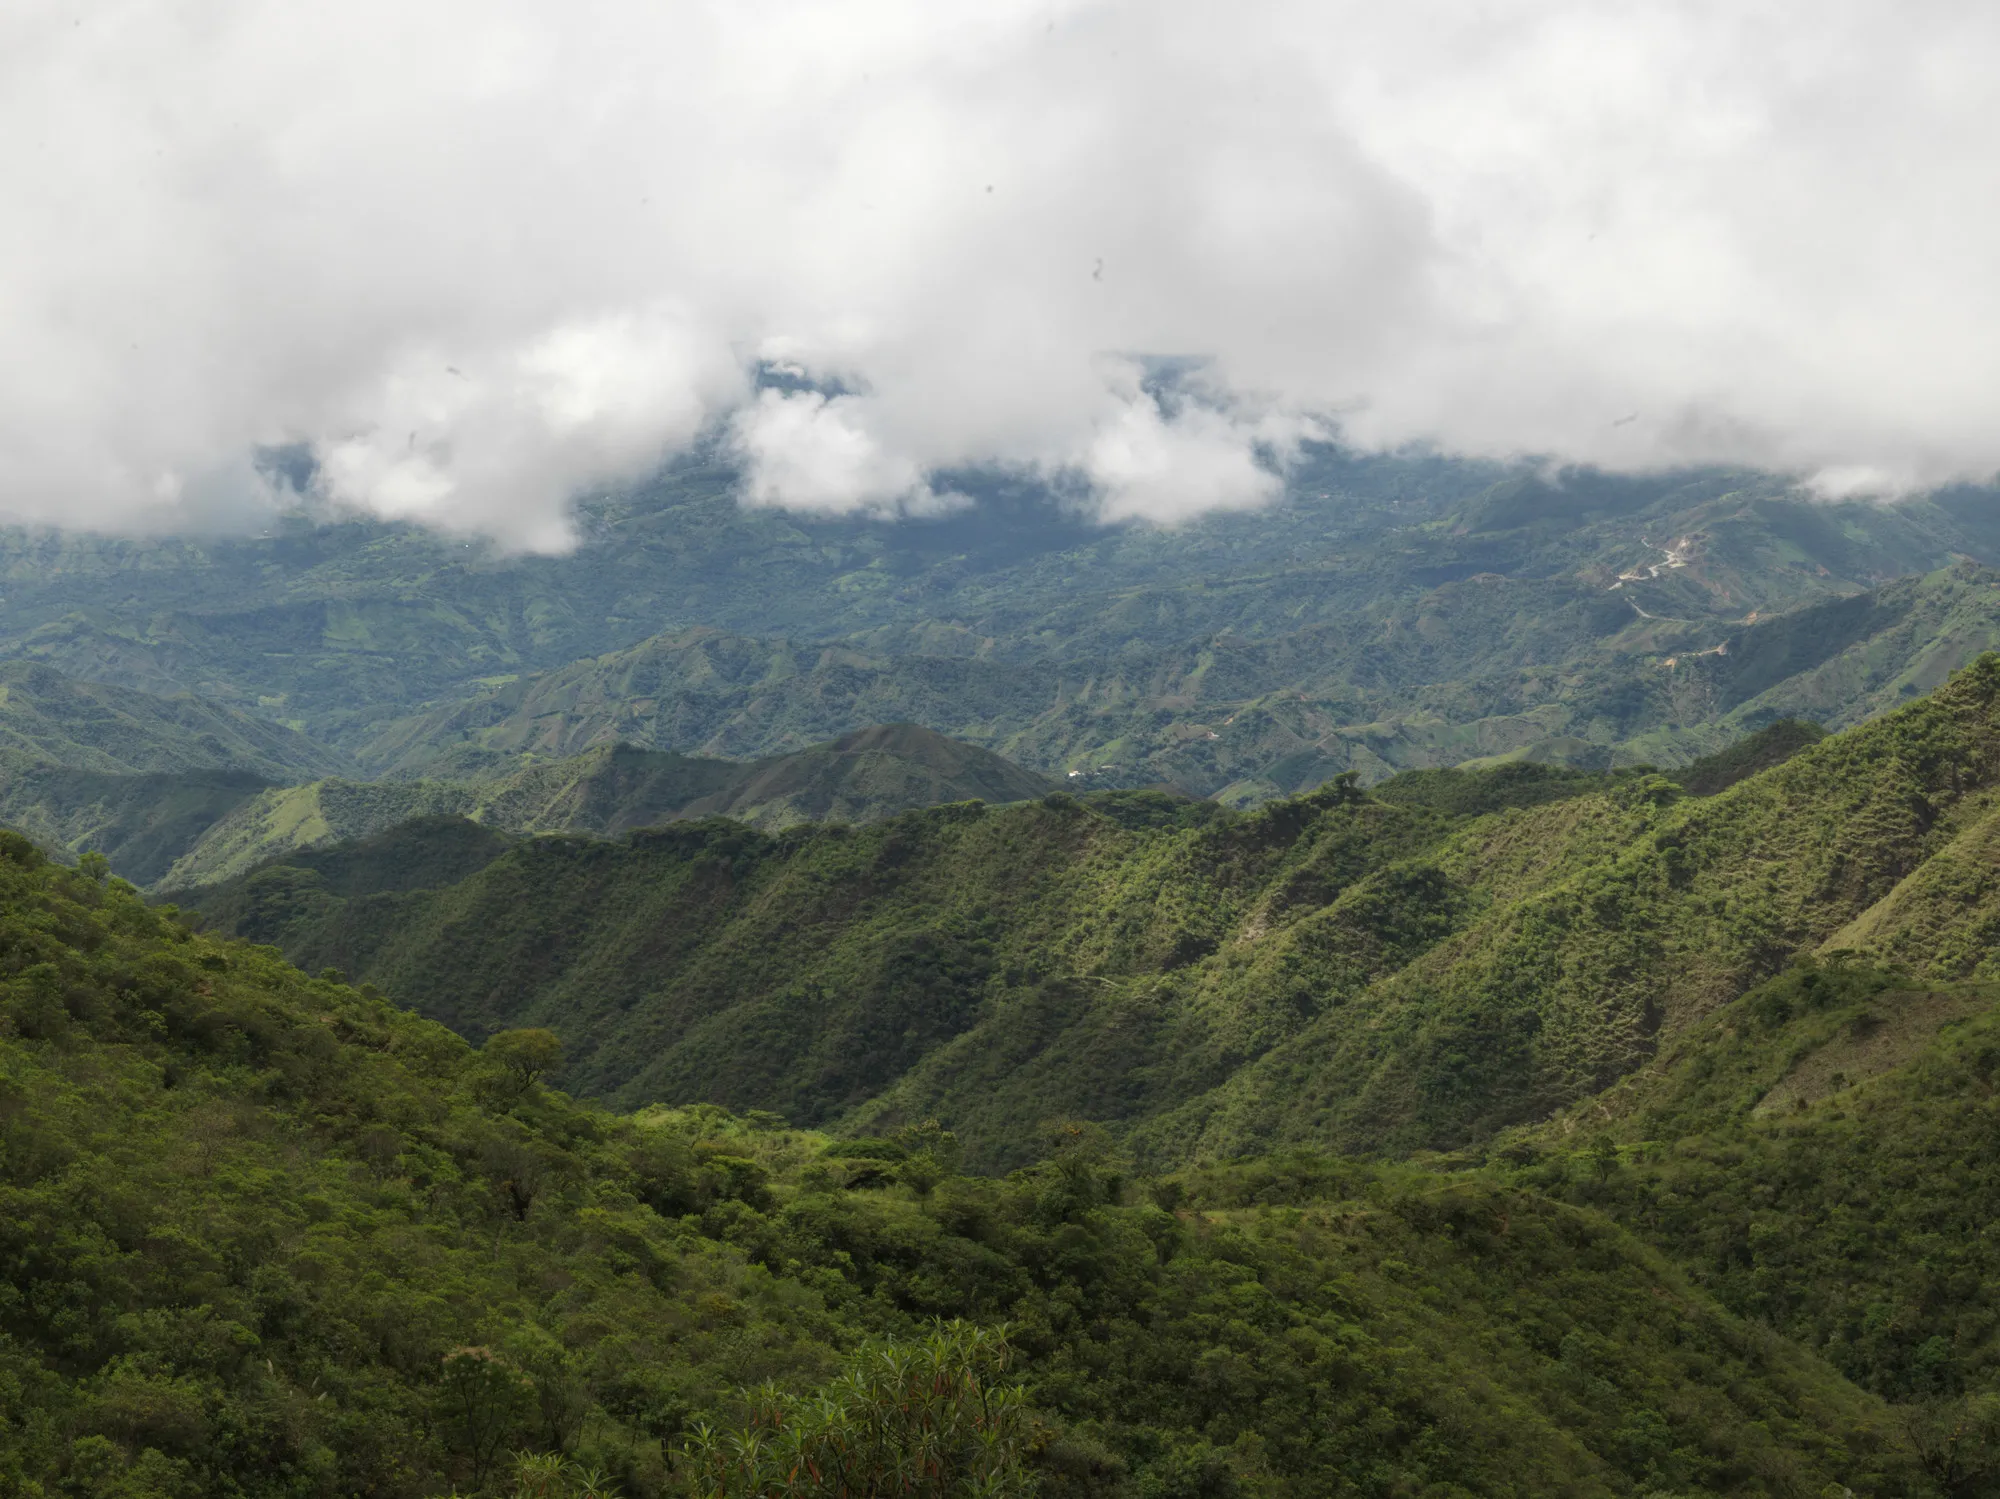 Scenic photo of mountains covered in green vegetation with clouds above